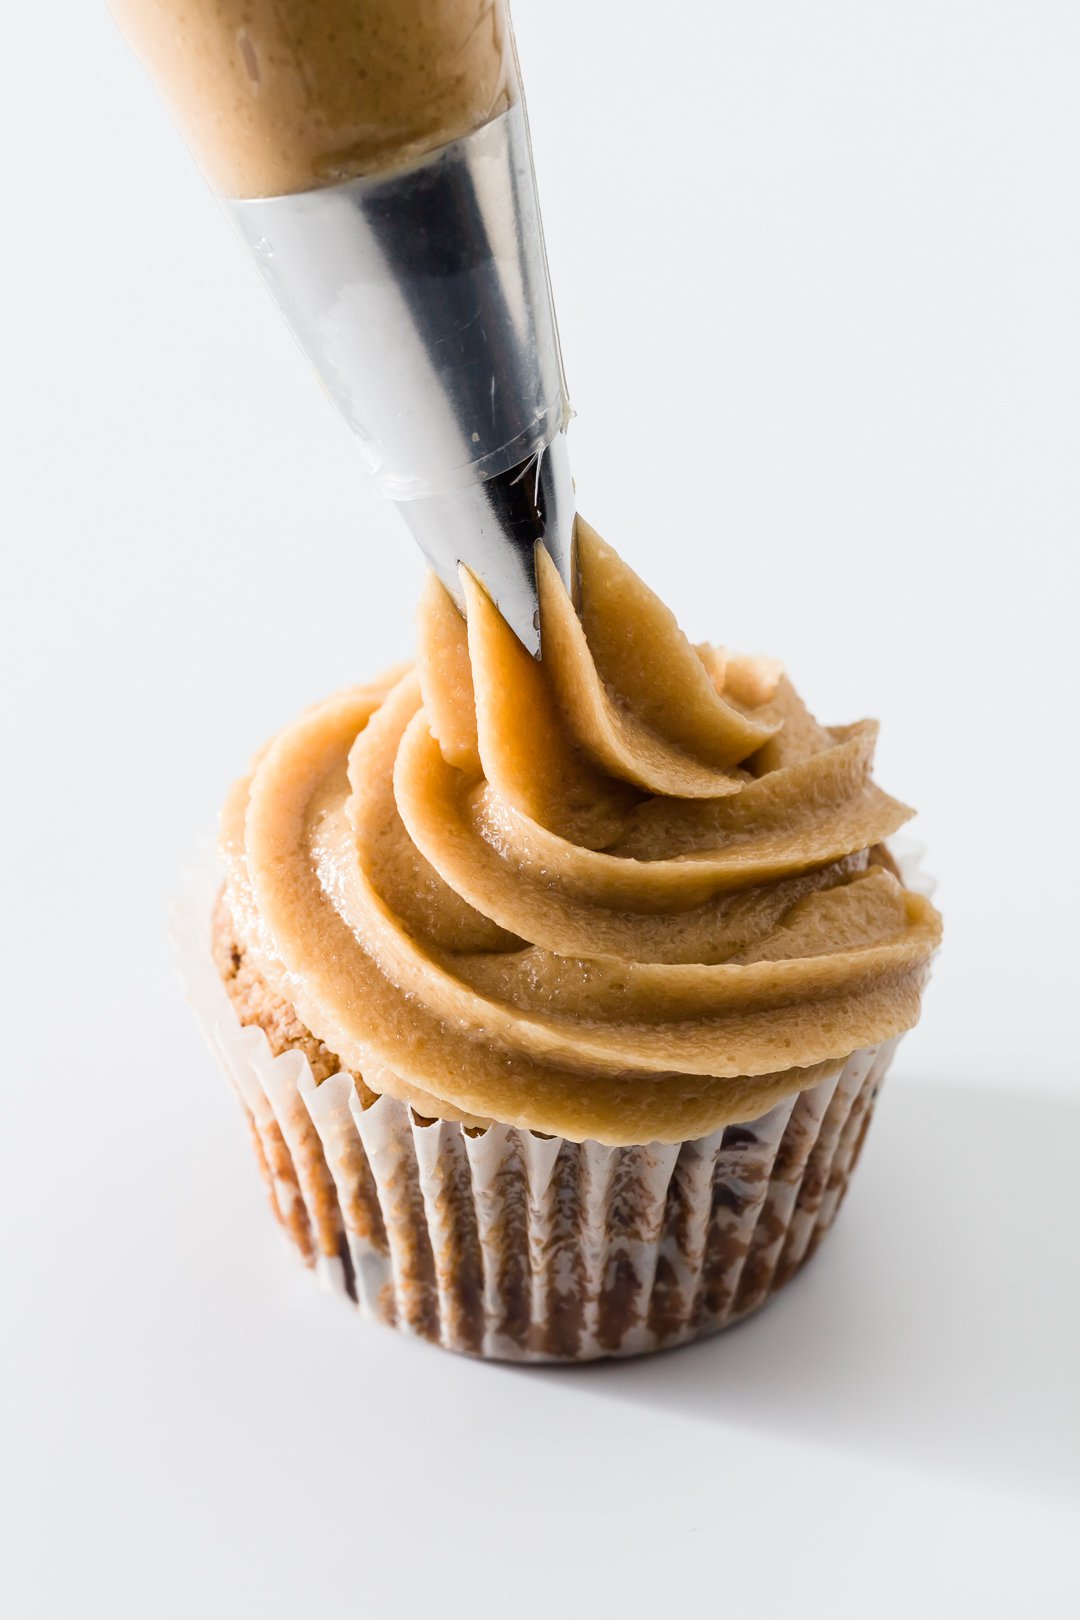 Cookie Dough Frosting being piped onto a cupcake